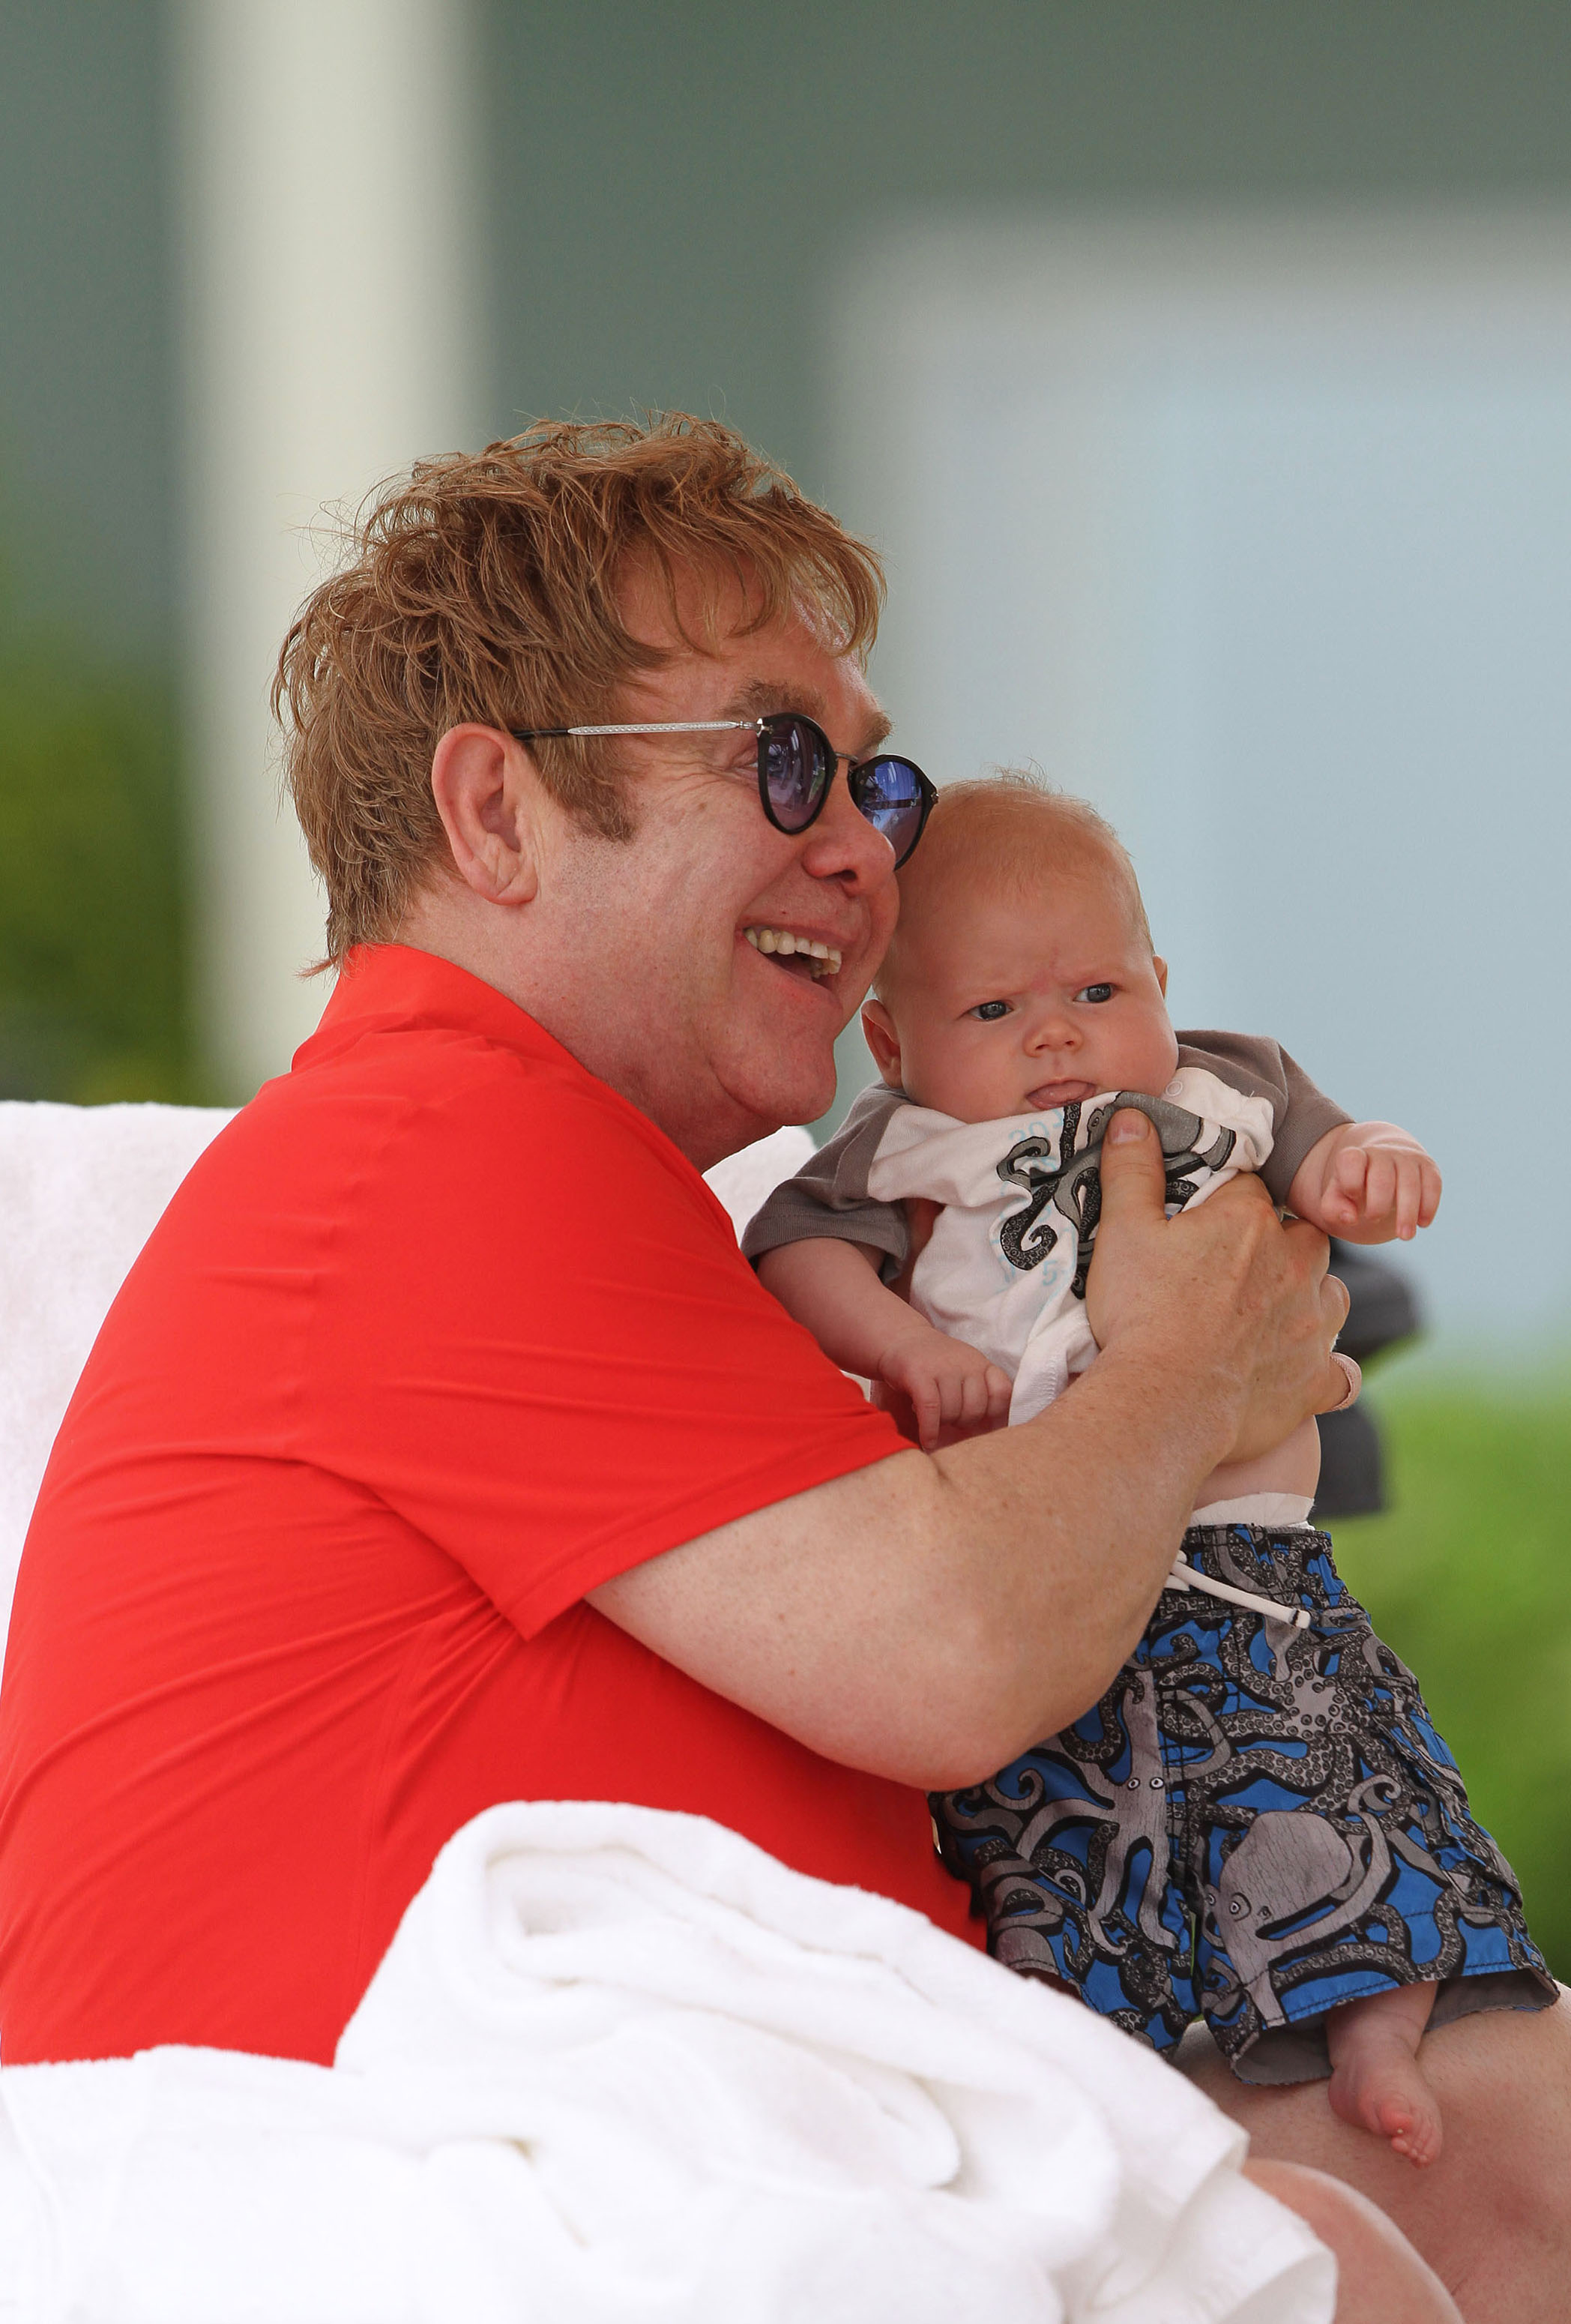 Elton John andhis son Zachary in Hawaii in 2021 | Source: Getty Images